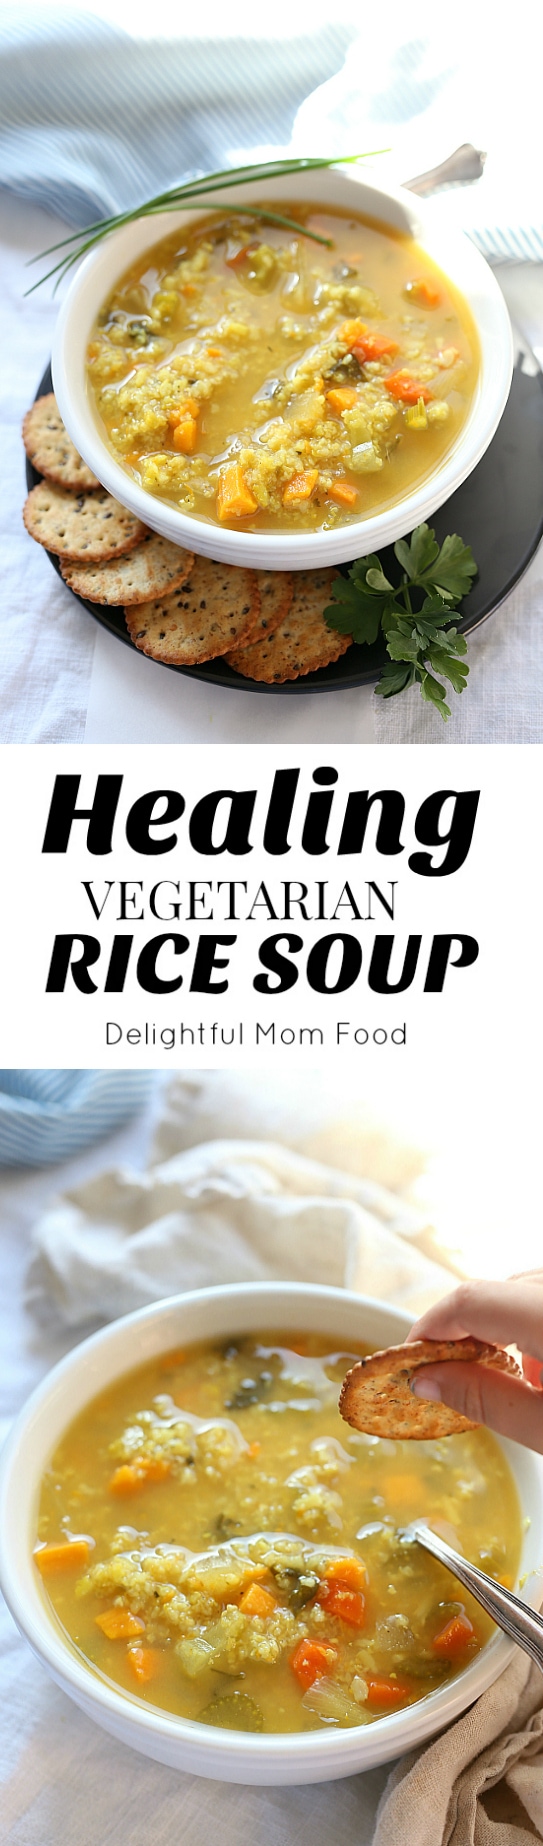 This hearty vegetarian crock pot rice soup recipe is the perfect food-for-your-soul! Made with vegetable broth or if you are not a vegetarian add chicken for added protein! Delightful Mom Food #rice #soup #recipe #slowcooker #easy #healthy #vegetarian #vegetable